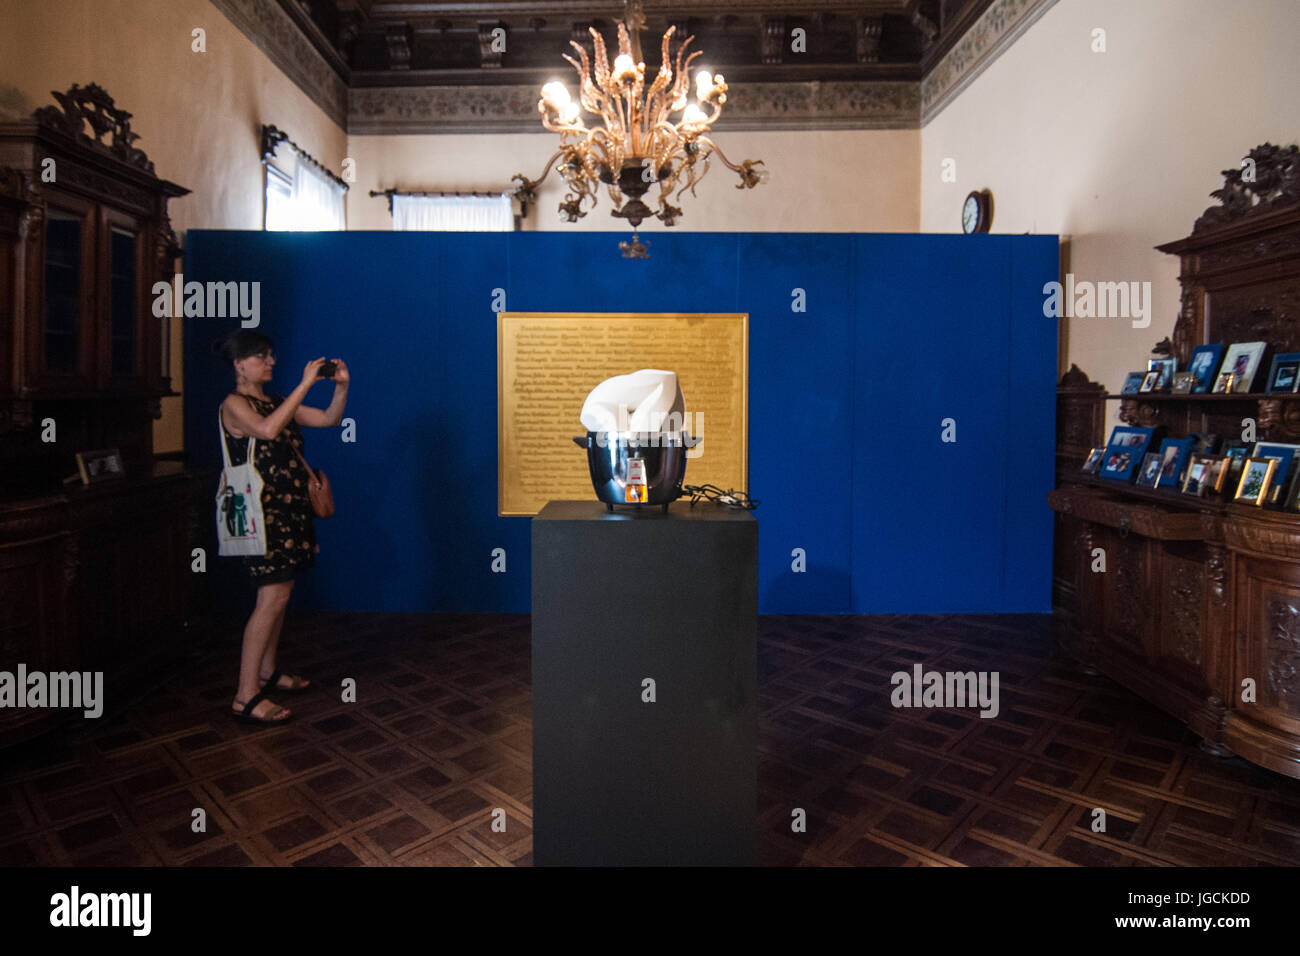 Venice, Italy. 05th July, 2017. A visitor takes a picture of the Diaspora pavilion, where there are photographs on display by artist Khadija Saye, at the Biennale Arte 2017 on July 5, 2017 in Venice, Italy. The work of Khadija Saye, the 24-year-old photographer who died with her mother Mary Mendy in the Grenfell Tower fire in West London last week, is on show in the Diaspora Pavilion at the Venice Biennale in a presentation curated by David A Bailey featuring emerging artists from diverse cultural backgrounds. Credit: Awakening Photo Agency/Alamy Live News Stock Photo